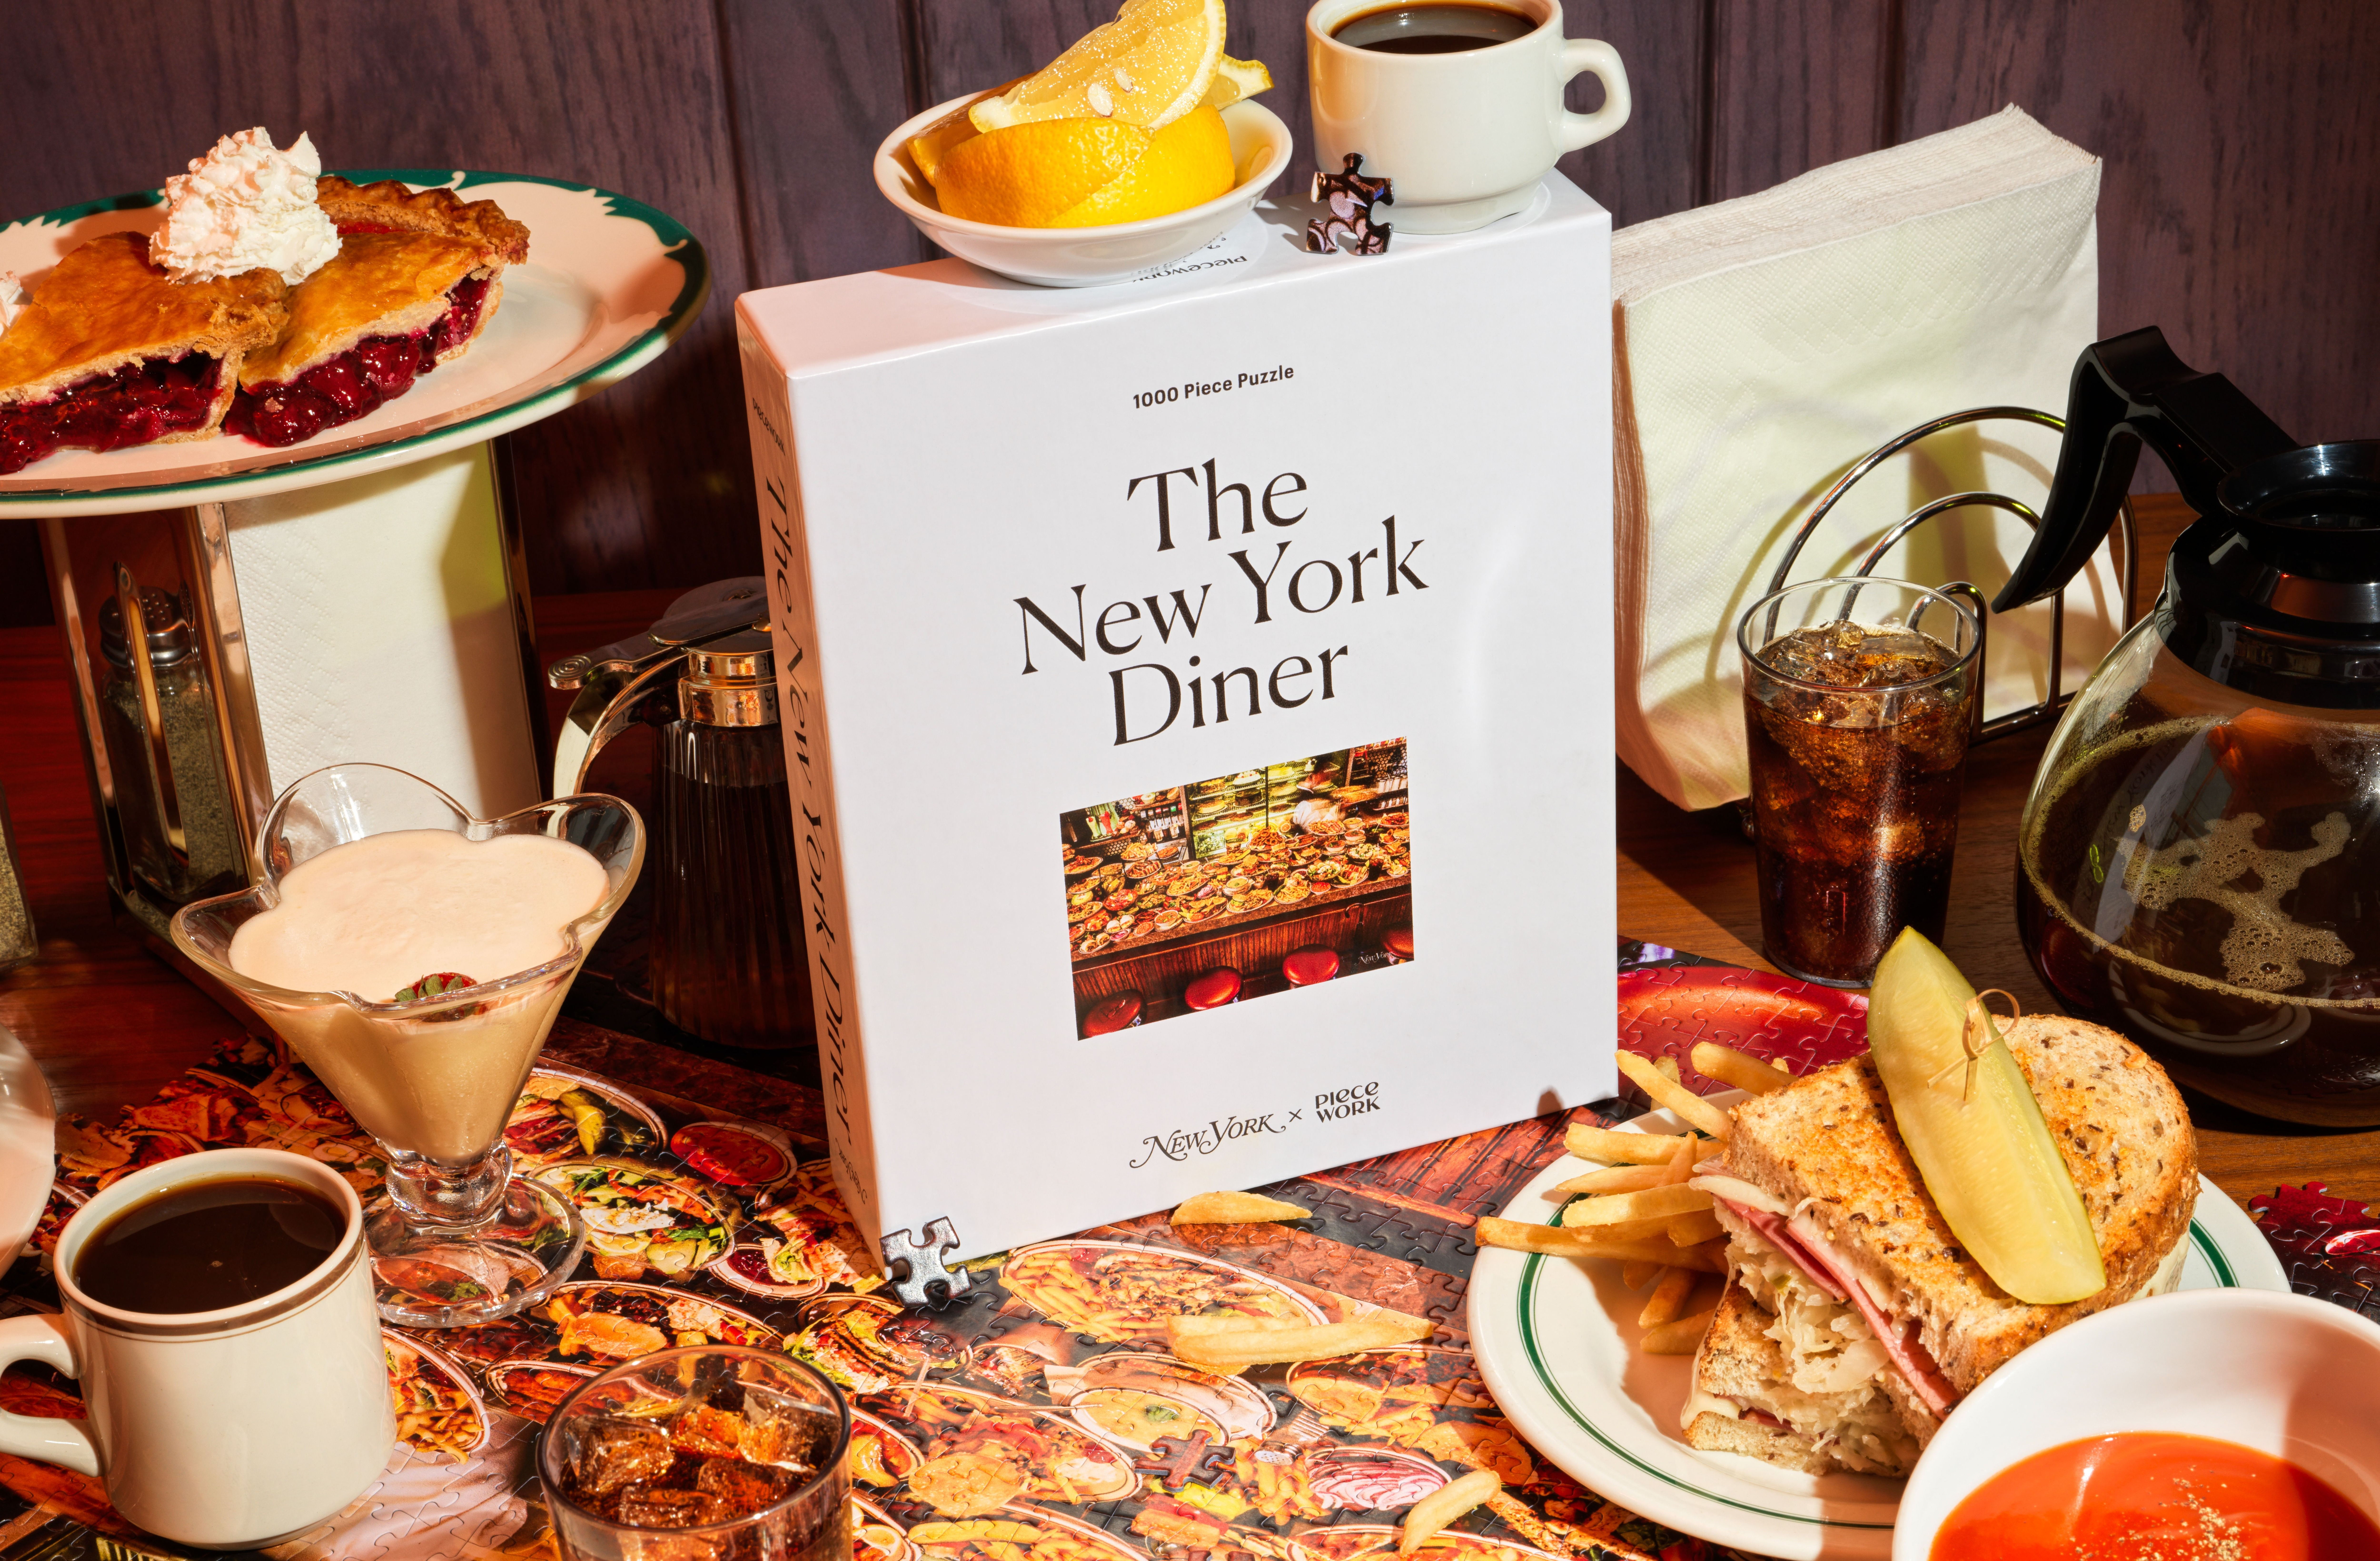 The New York Diner – Piecework Puzzles